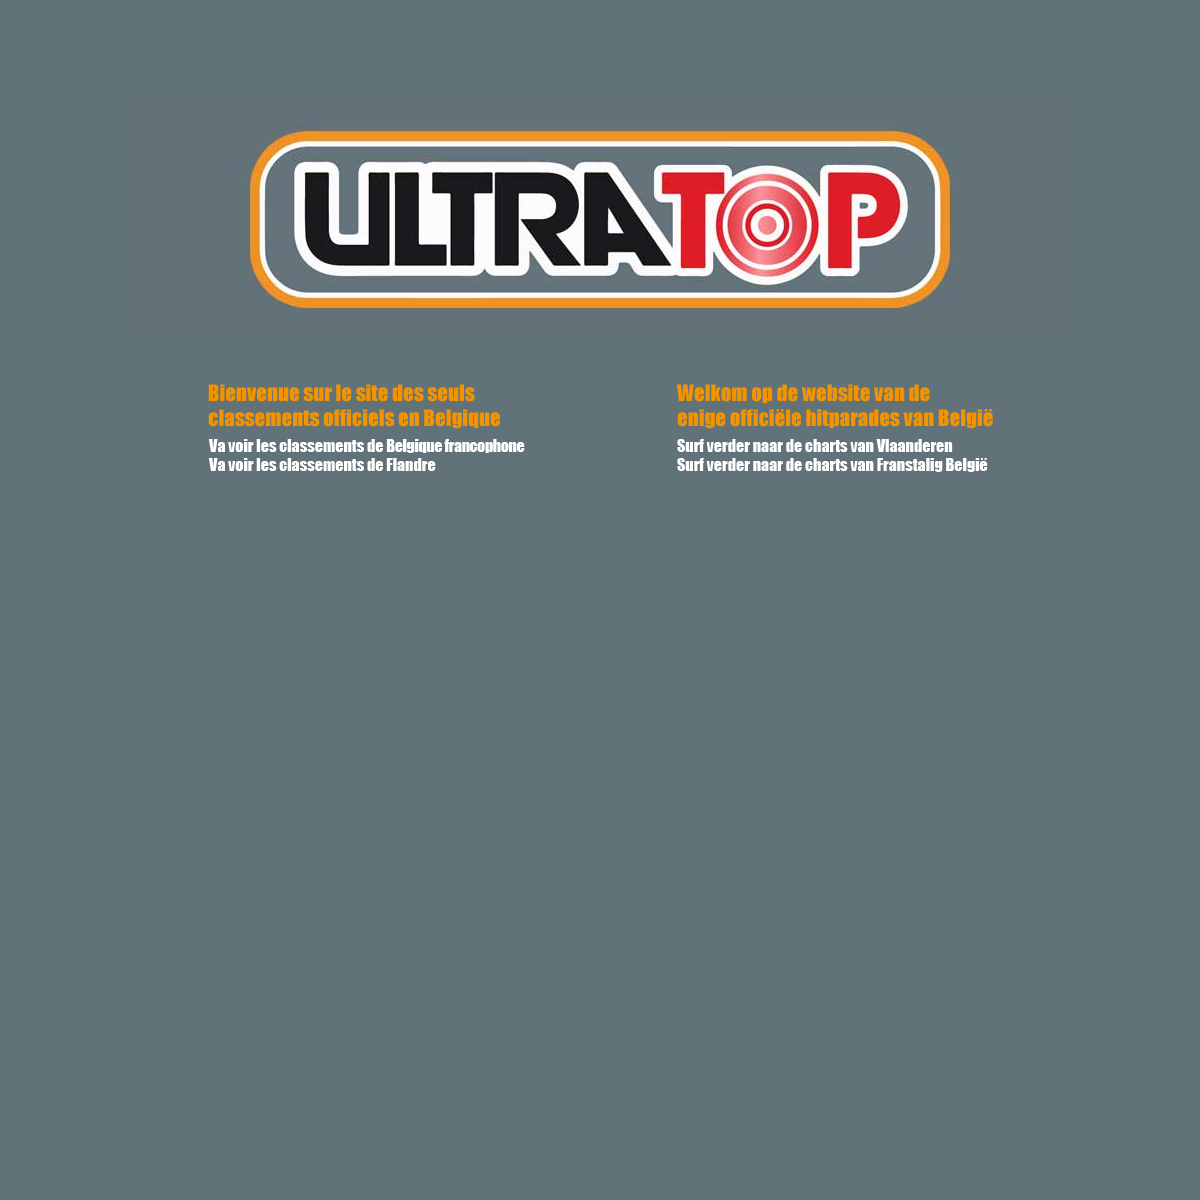 A complete backup of ultratop.be